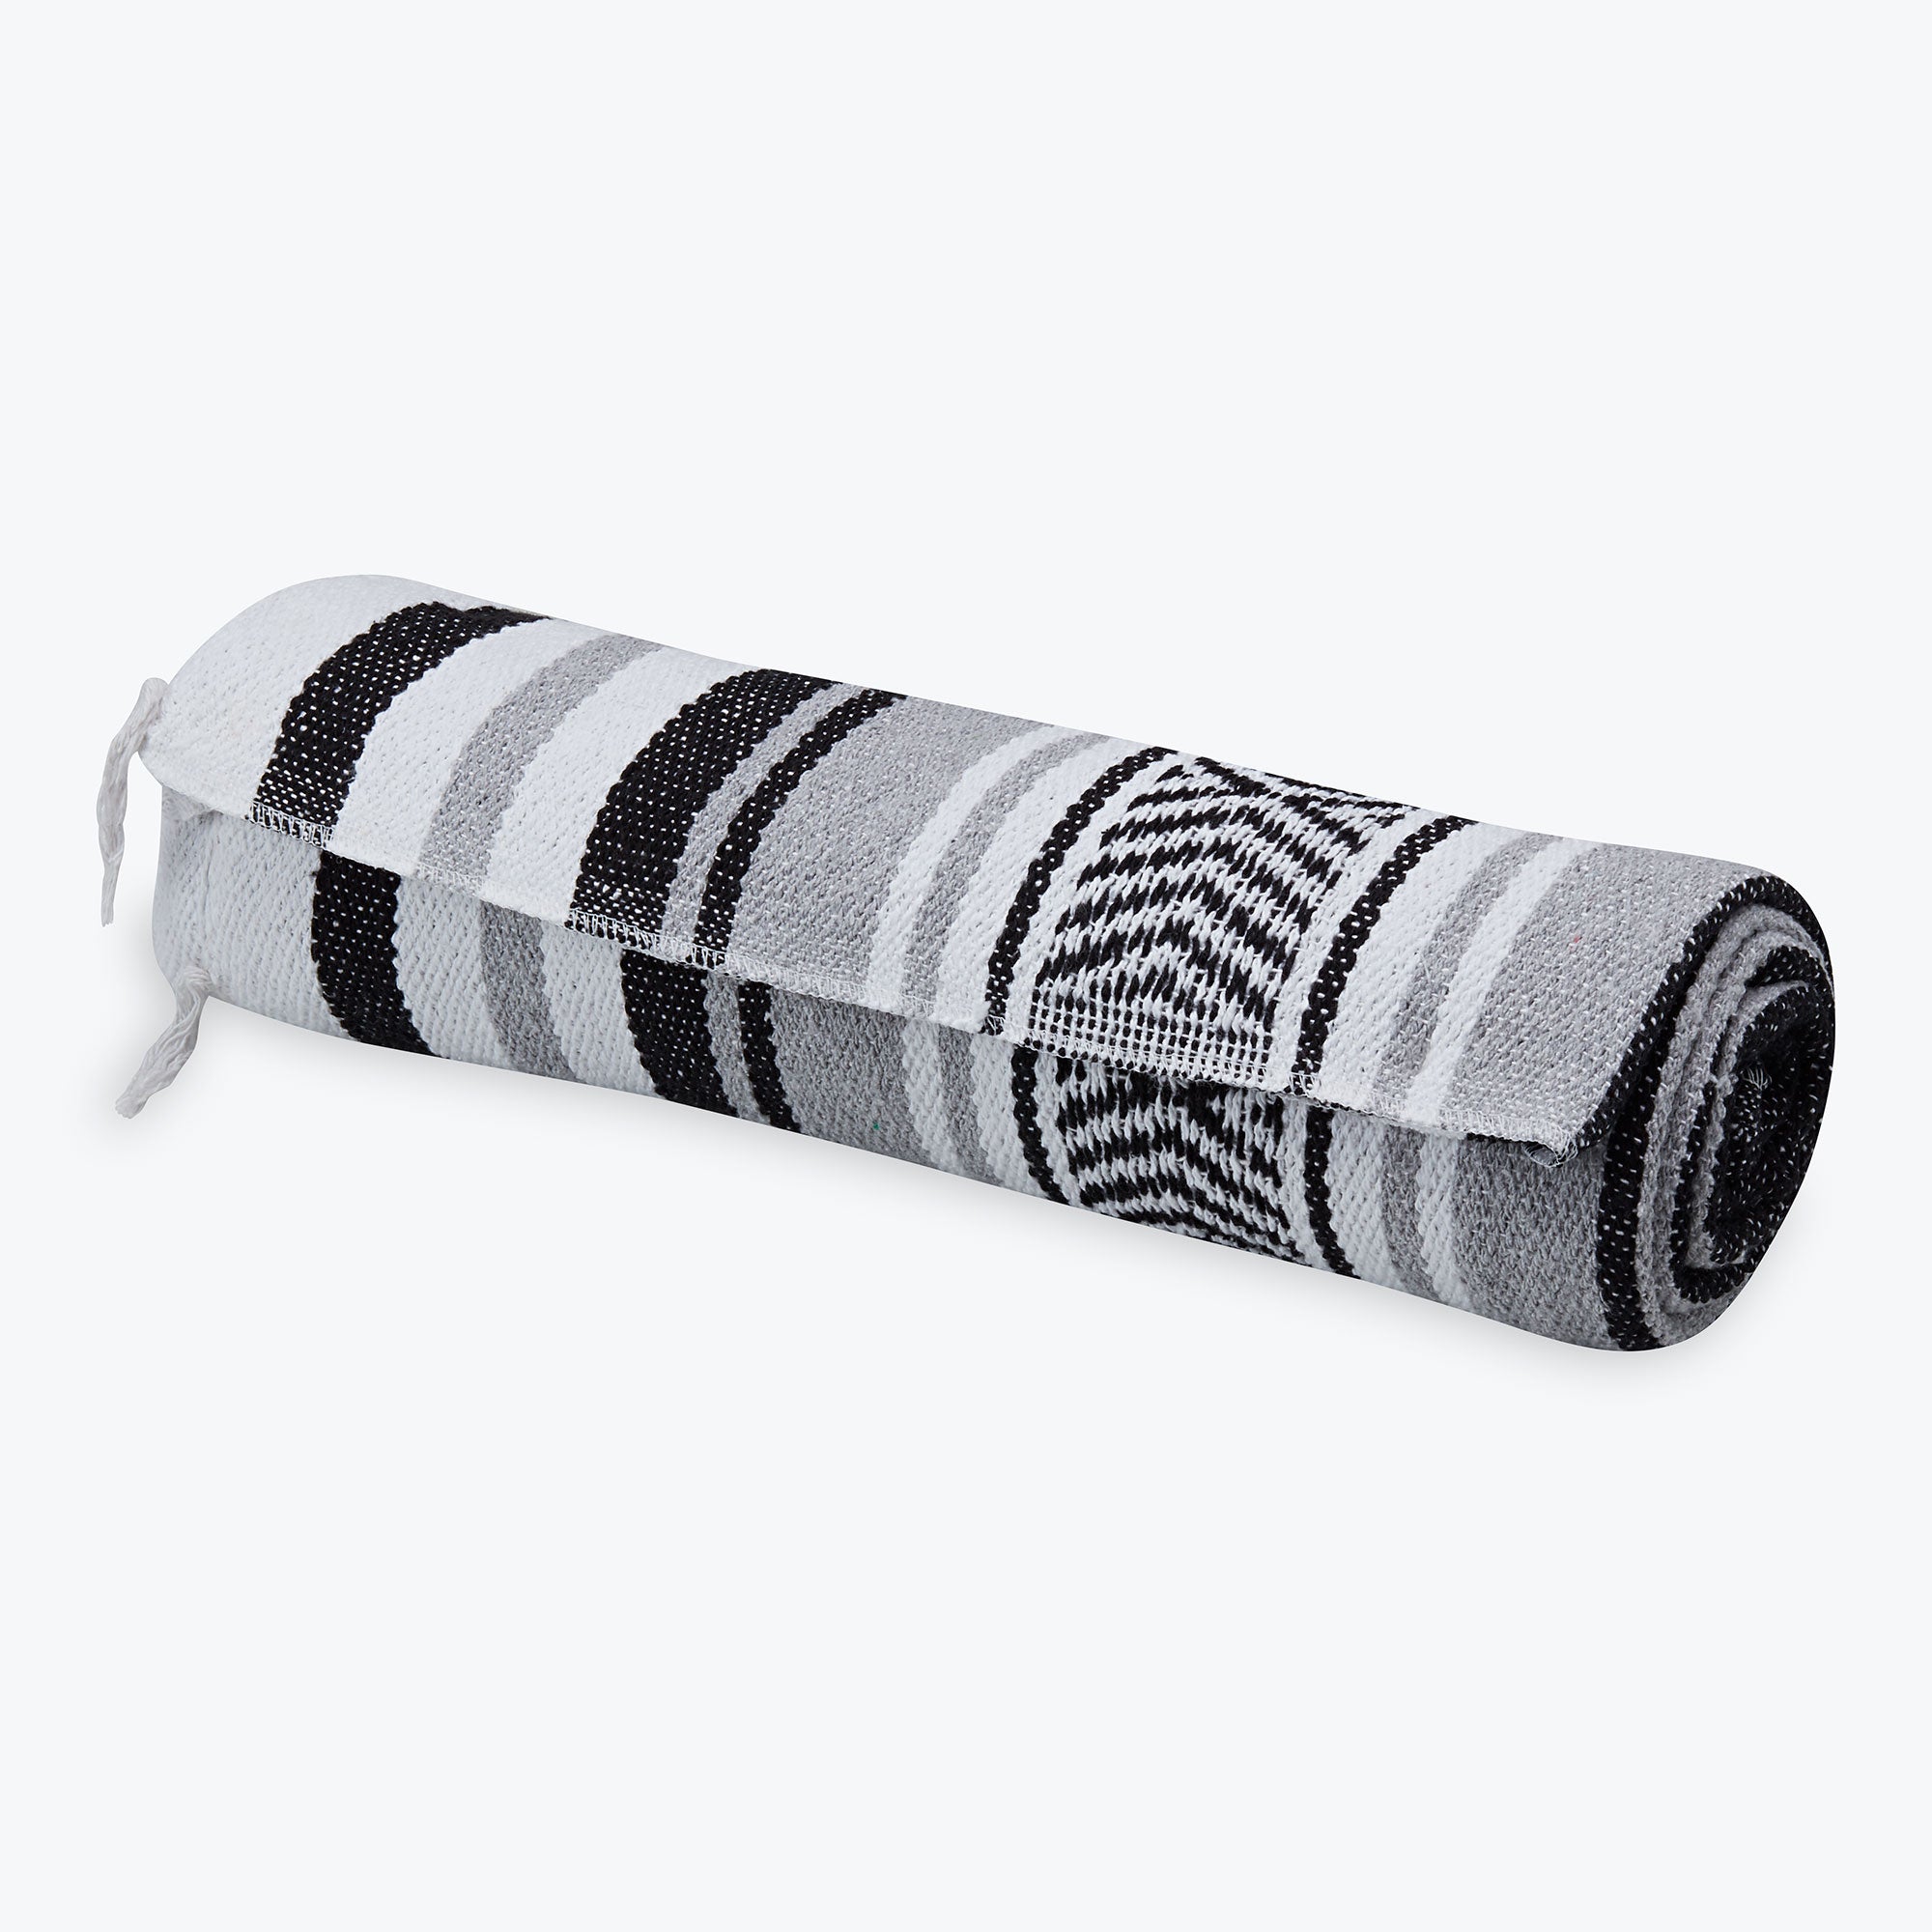 Traditional Mexican Woven Blanket Gaiam